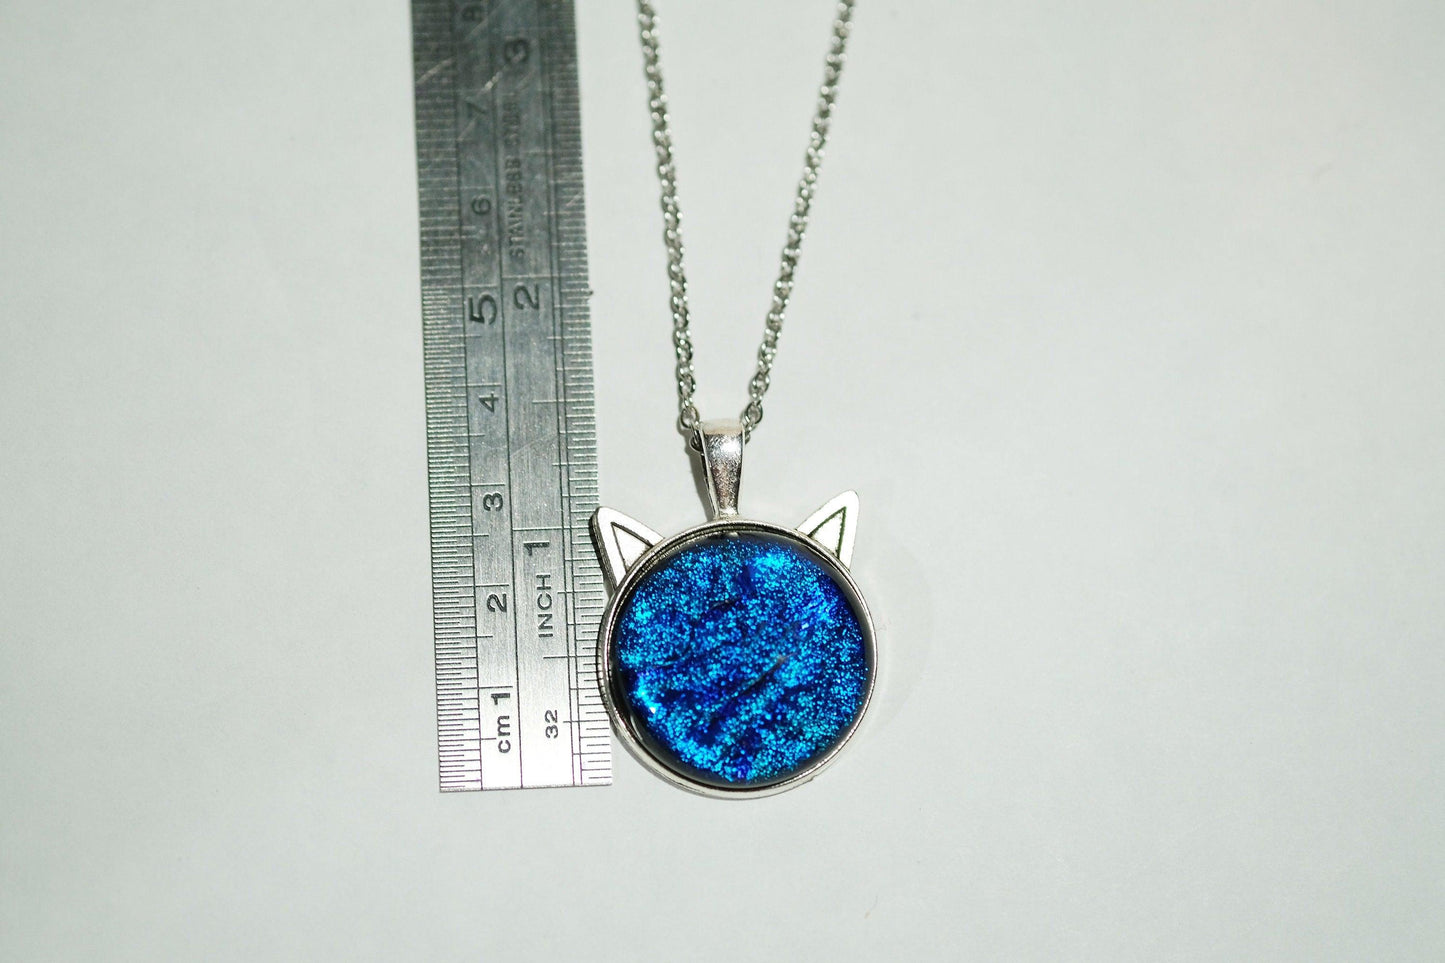 Silver Cat pendant necklace, with blue sparkling dichroic fused glass center stone on a 20 inch steel chain